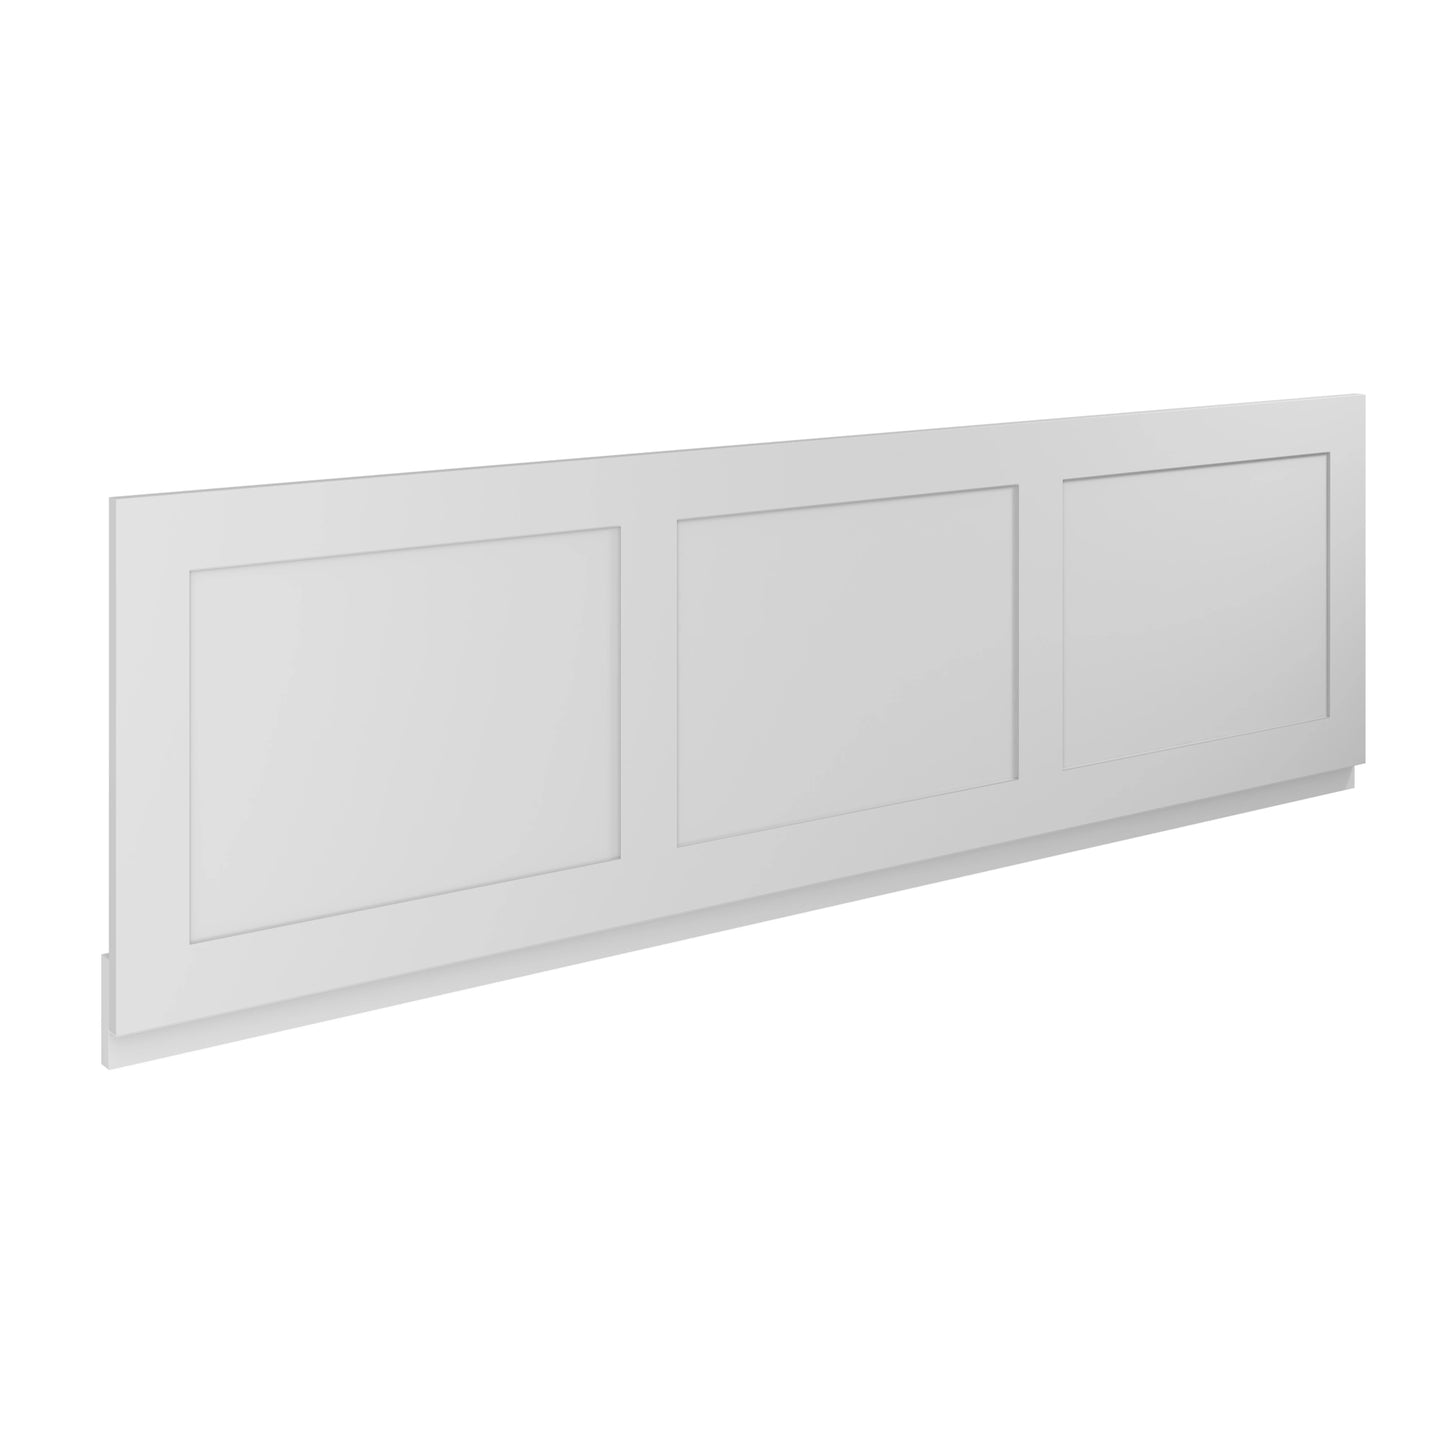 Classica Traditional Bath Side Panel & End Panel